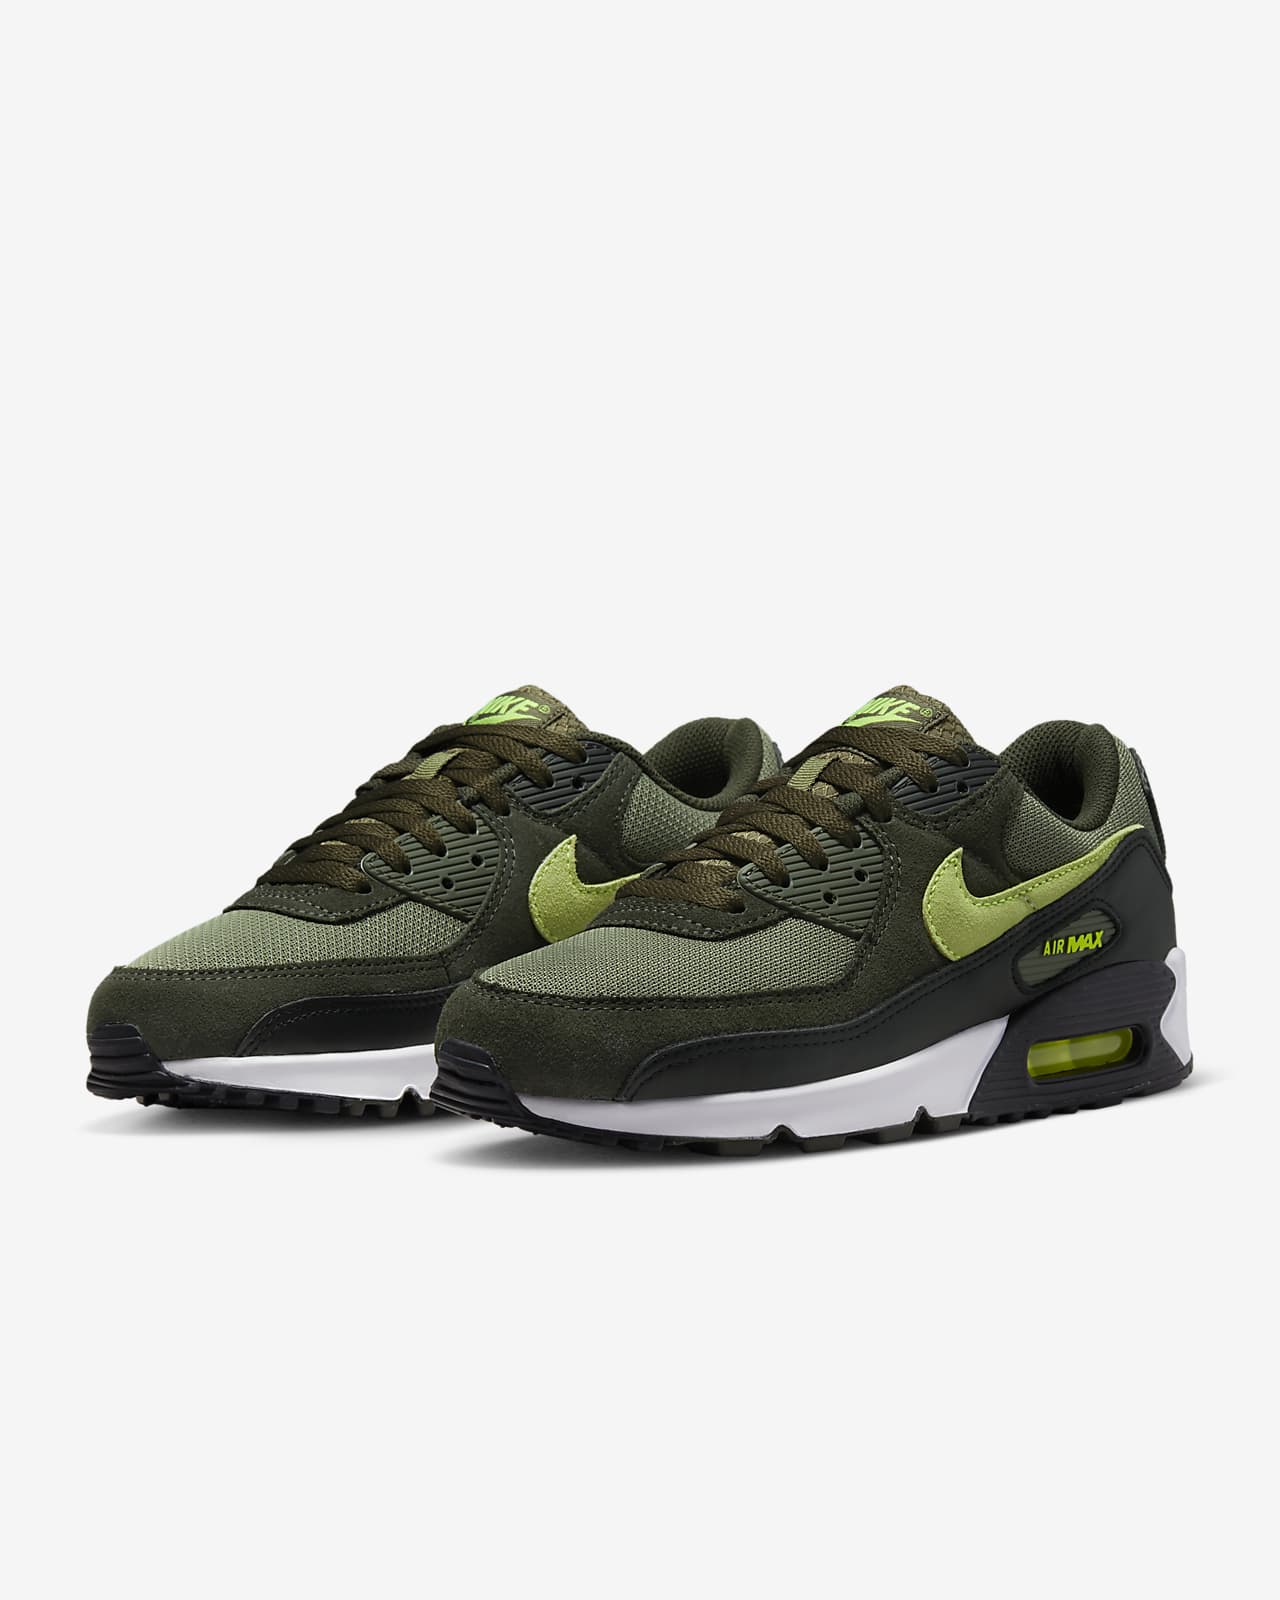 nike flyknit nike air max 90 shoes